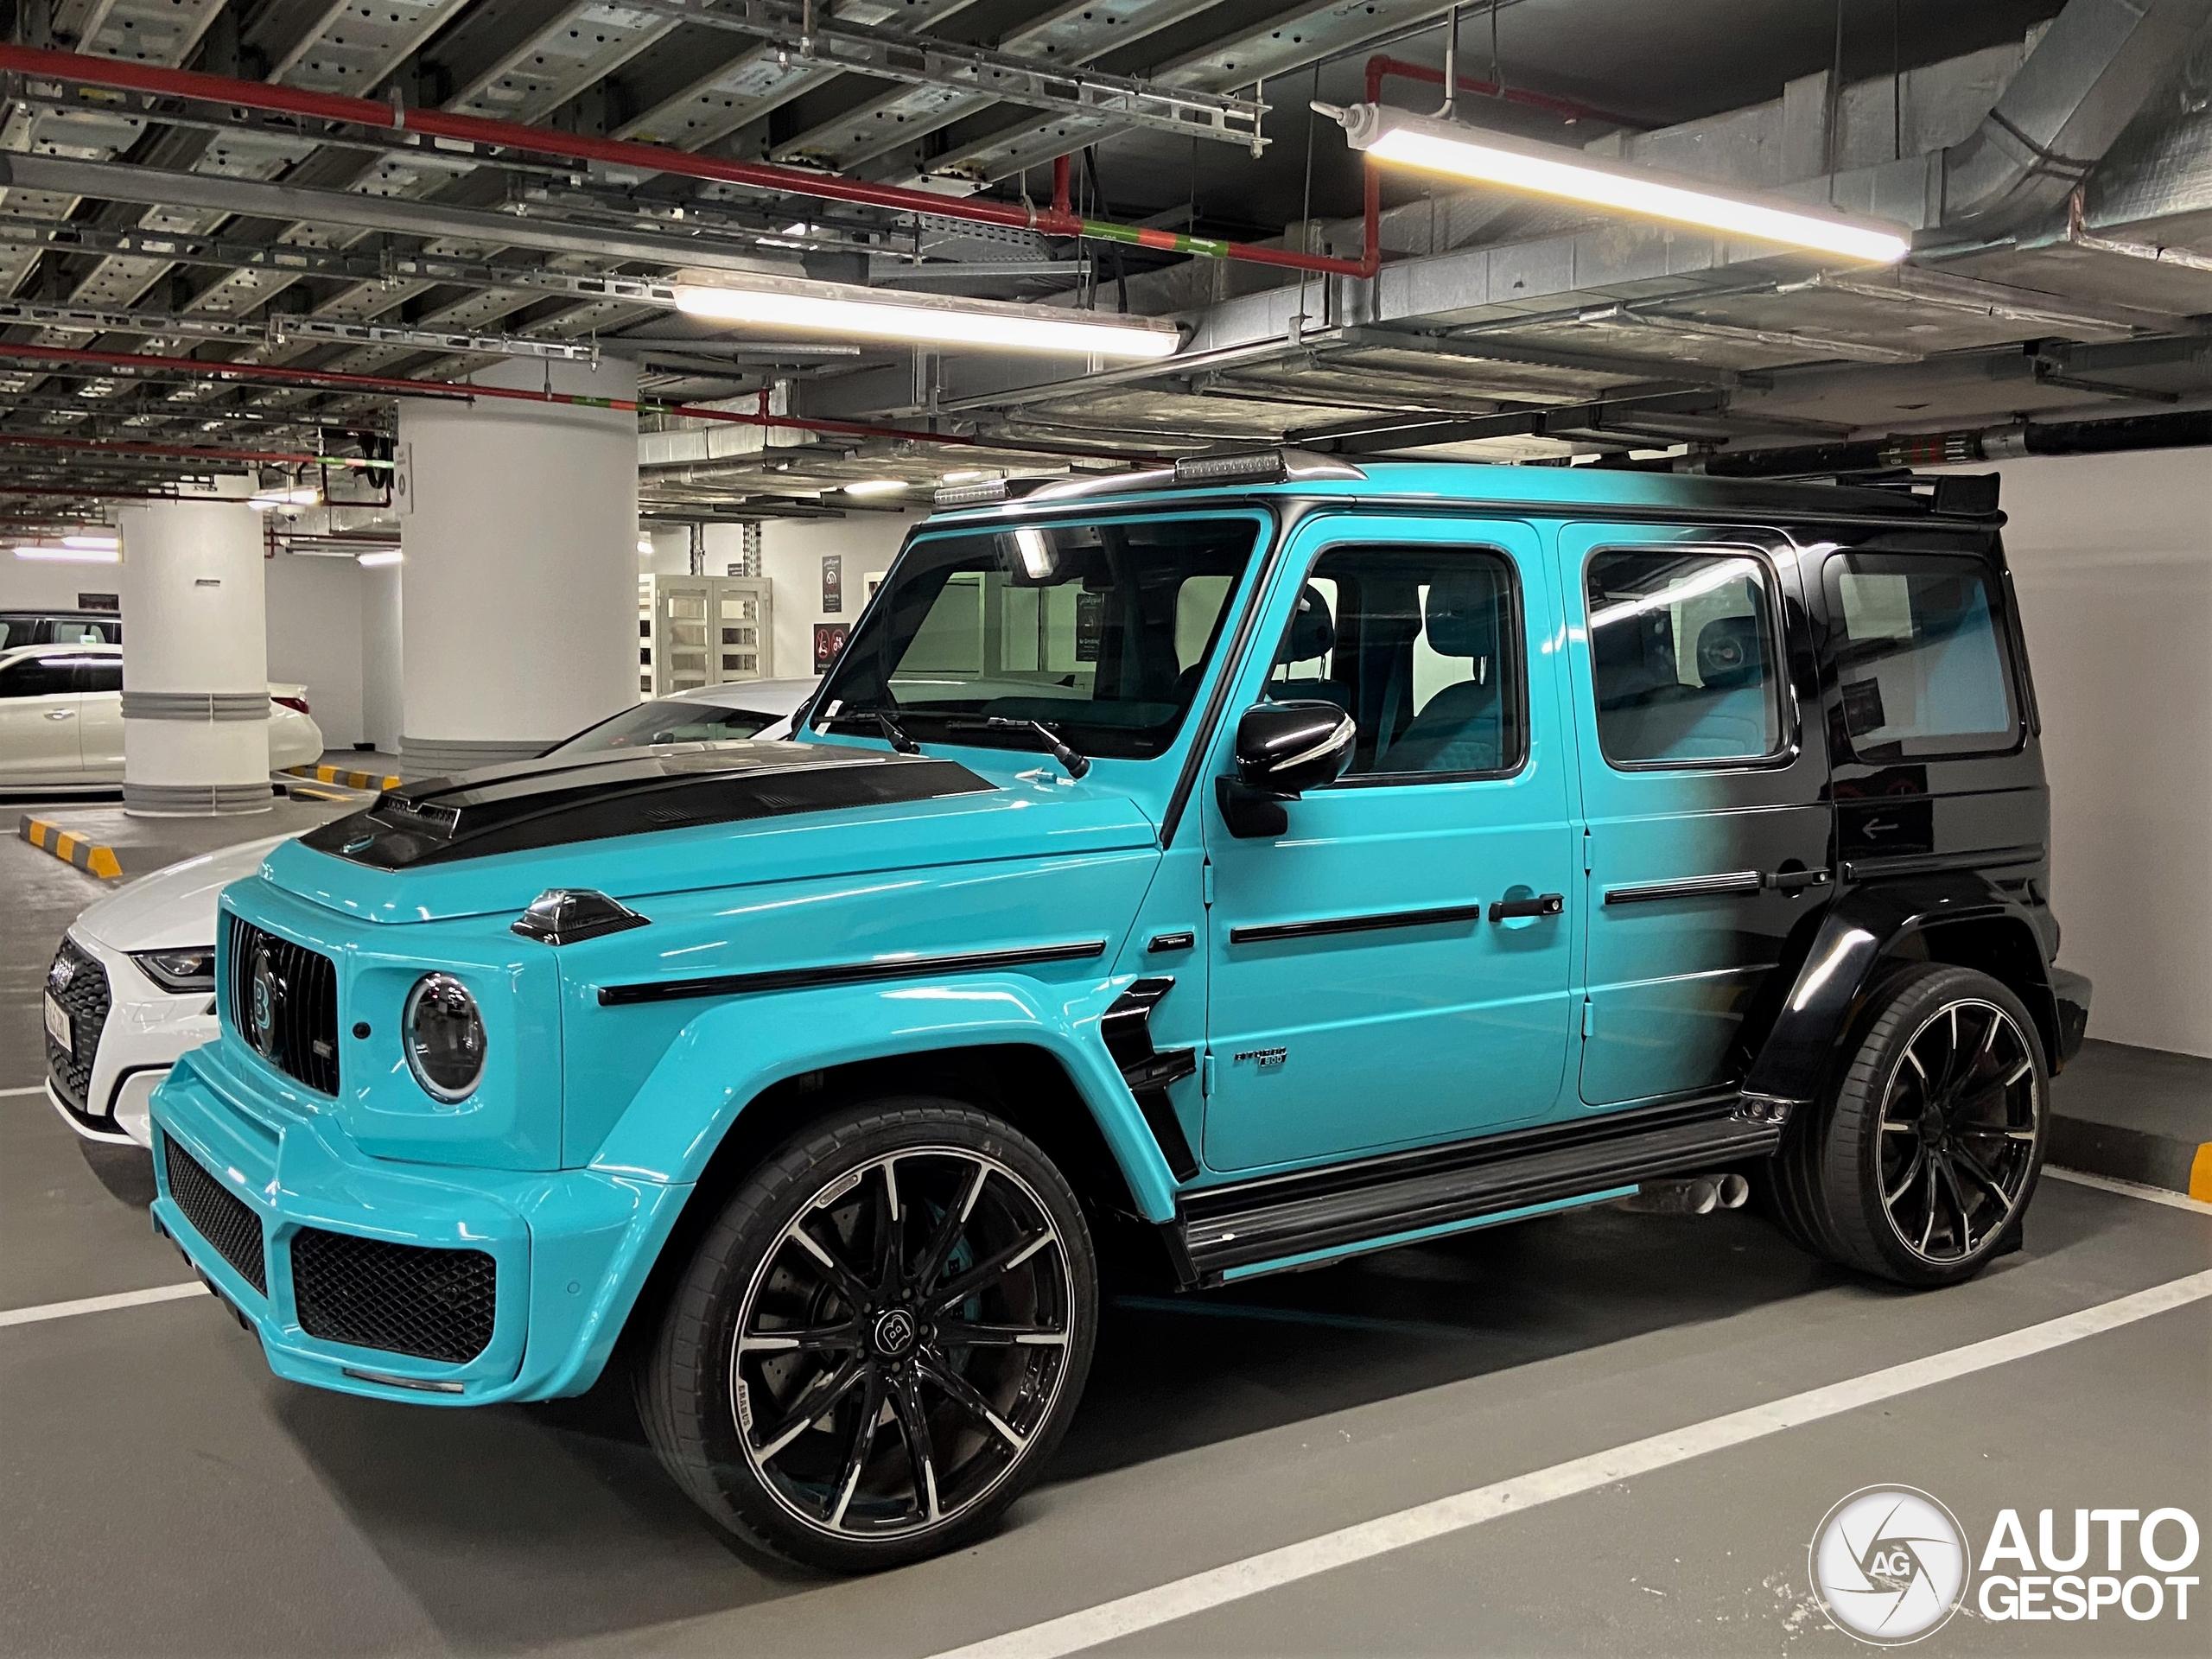 A G-Wagon without tinted windows